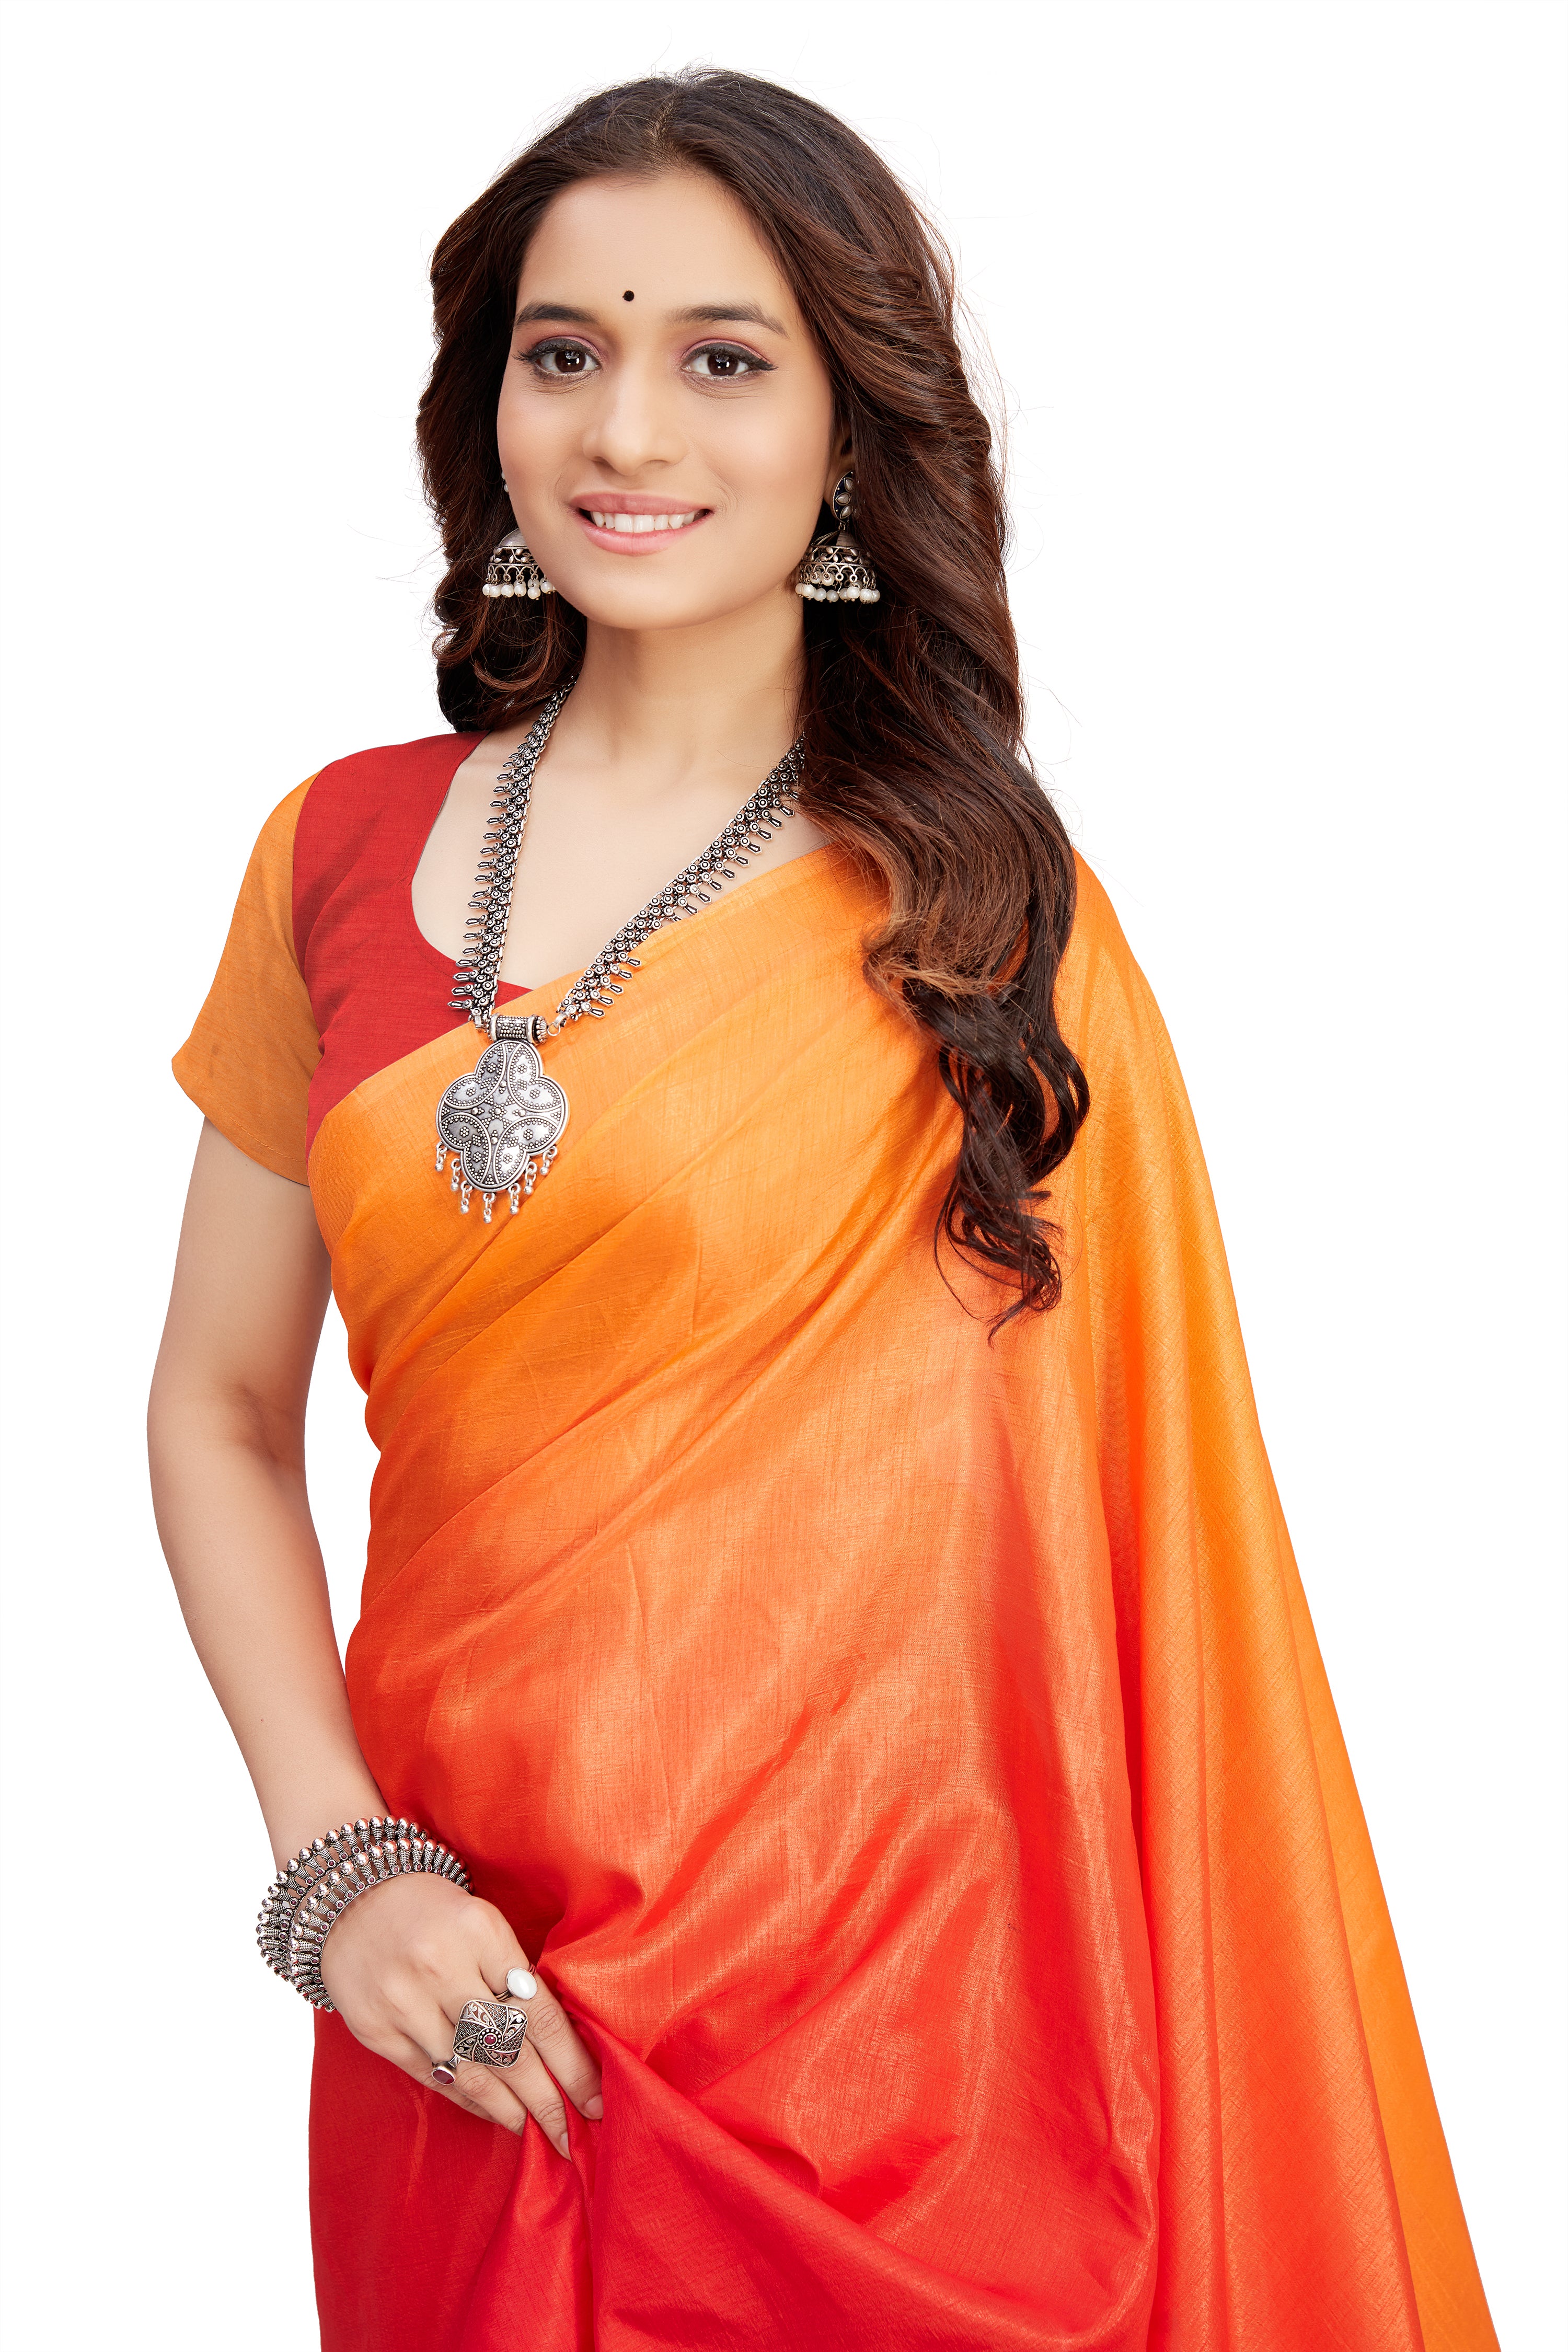 Women's self Woven Solid Textured Dual Shade Festive Wear Silk Blend Sari With Blouse Piece (Orange) - NIMIDHYA